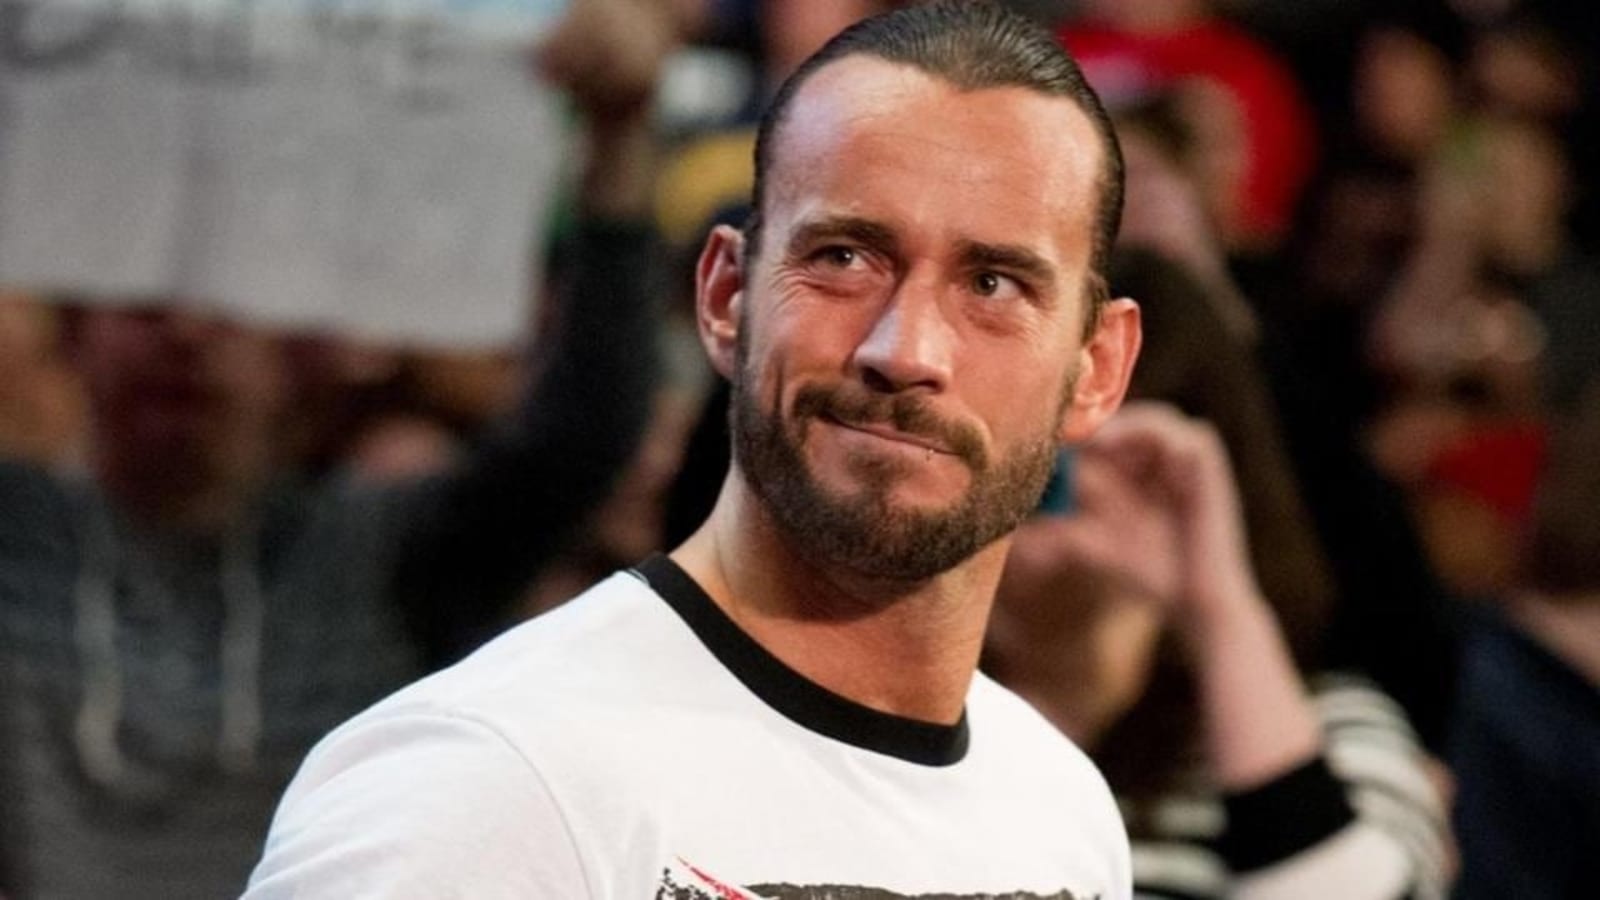 Former WWE champion CM Punk returns to wrestling after seven years